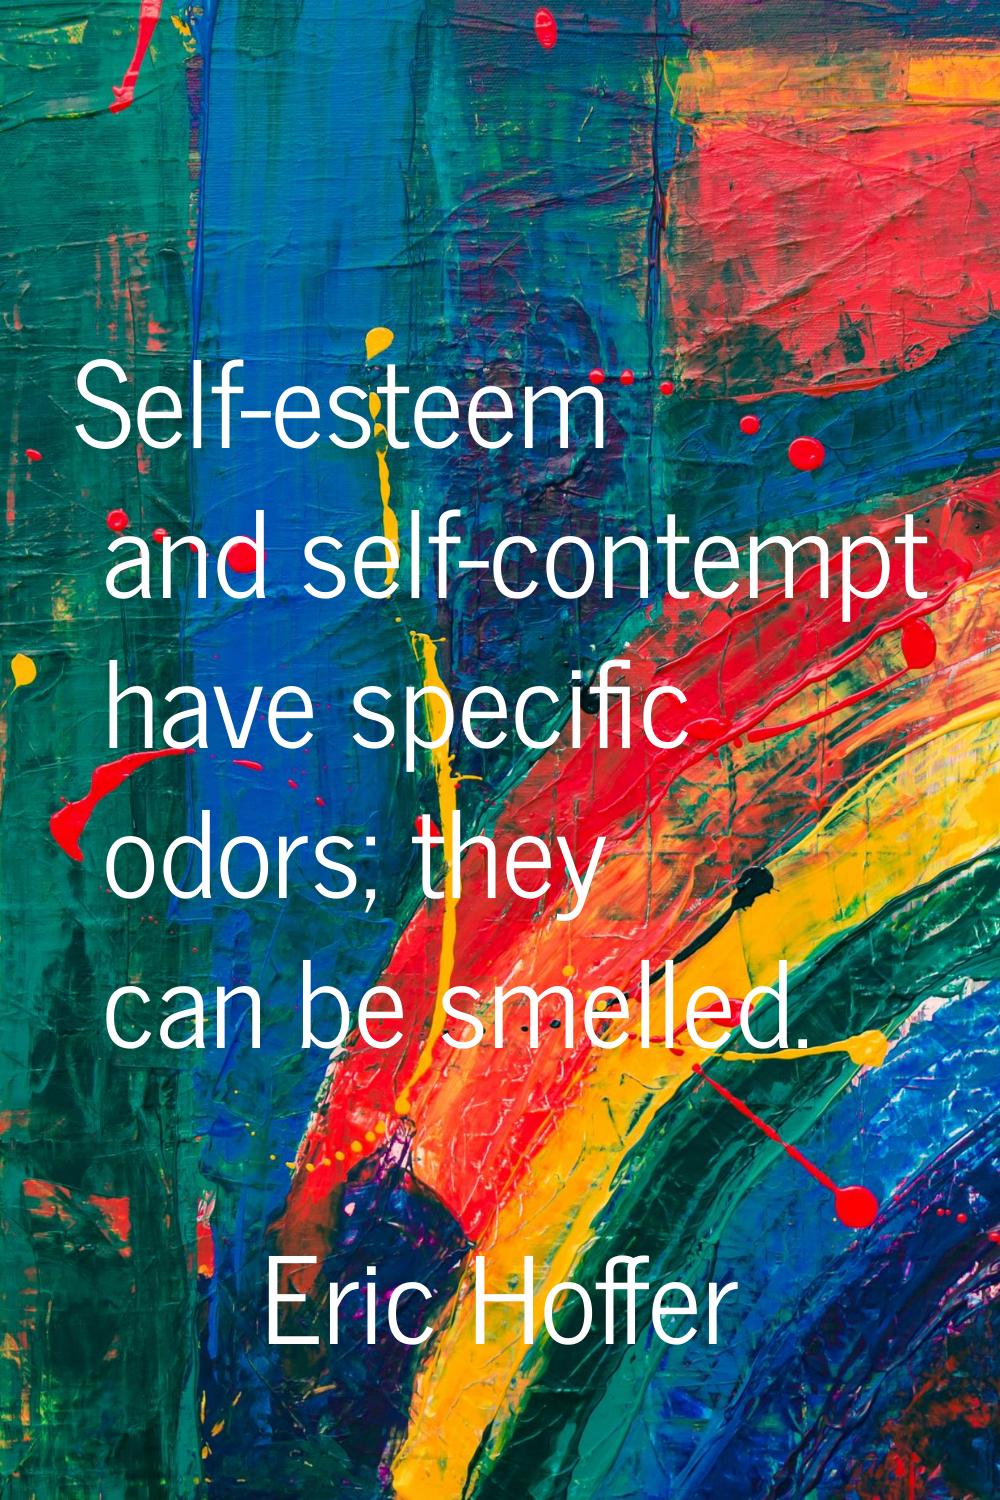 Self-esteem and self-contempt have specific odors; they can be smelled.